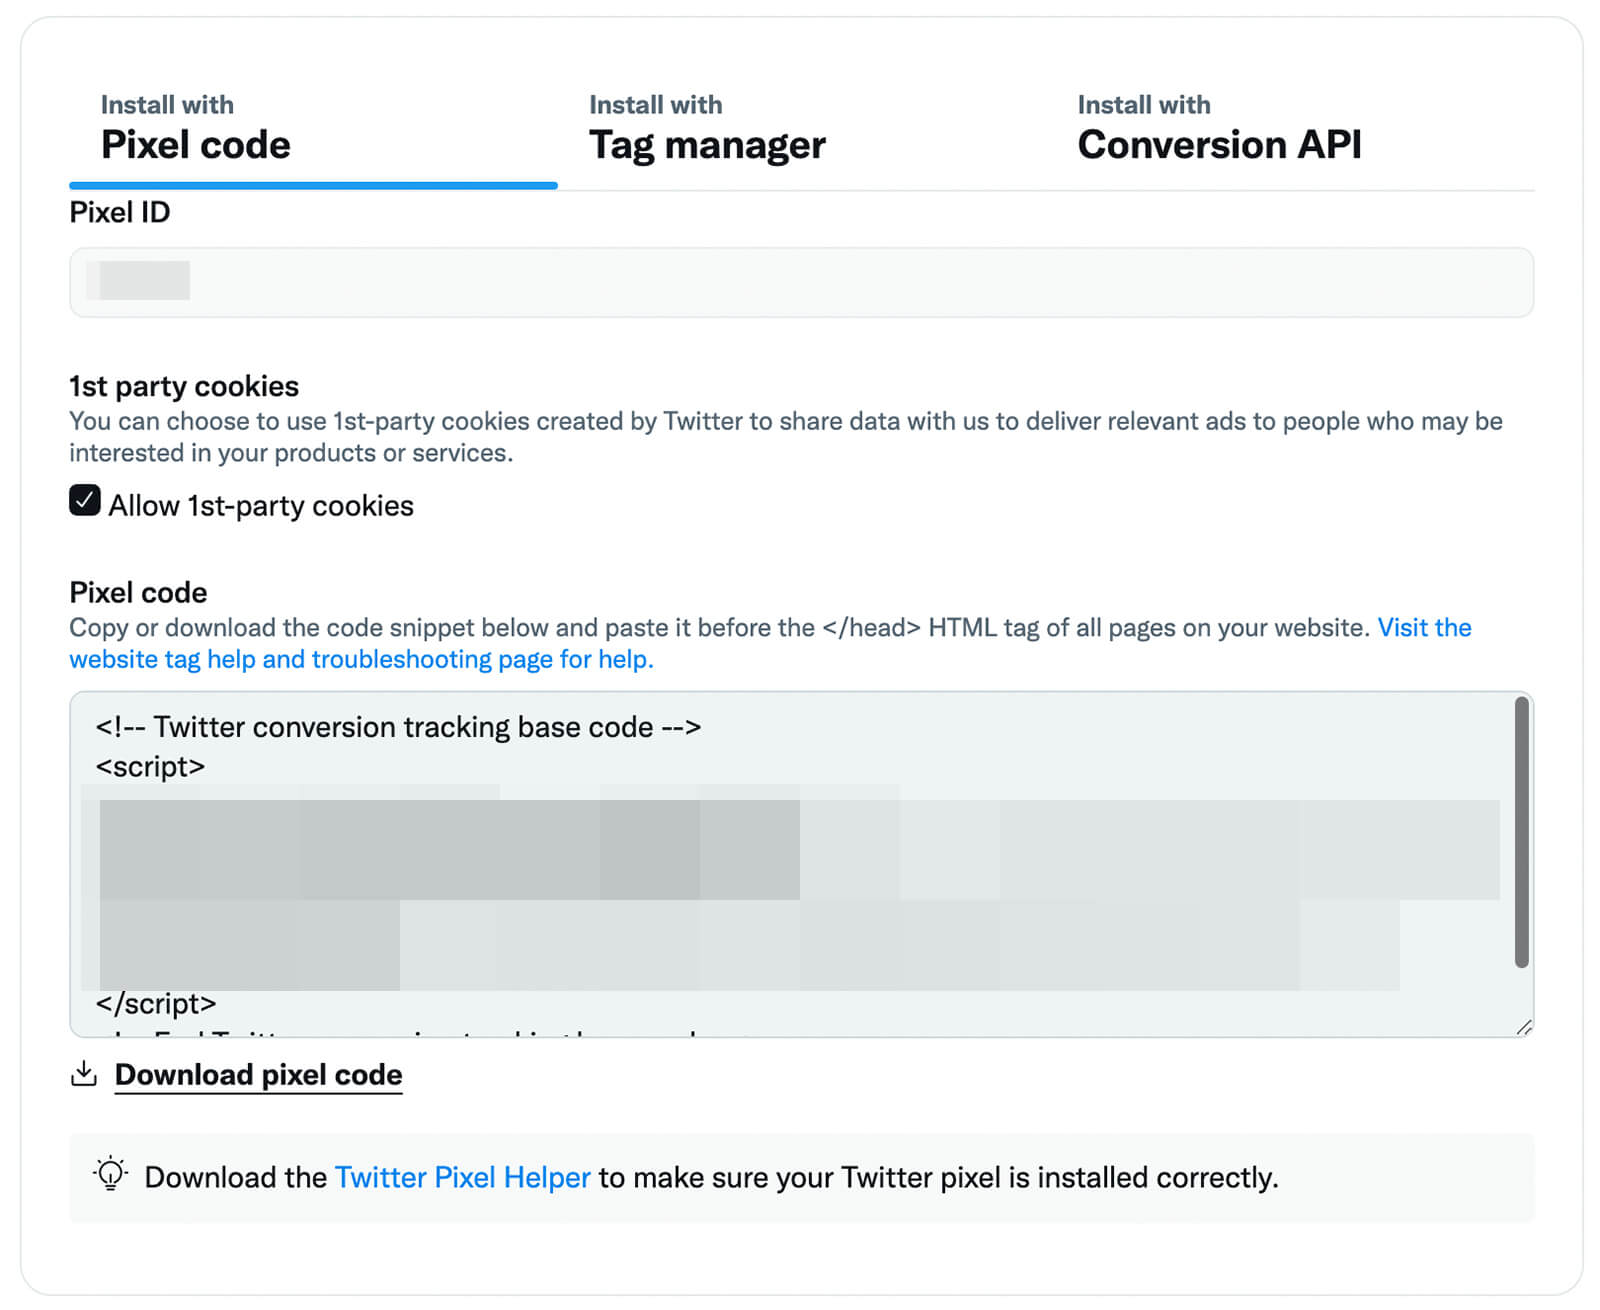 how-to-install-the-new-twitter-pixel-with-code-tab-review-settings-allow-first-party-cookies-example-5